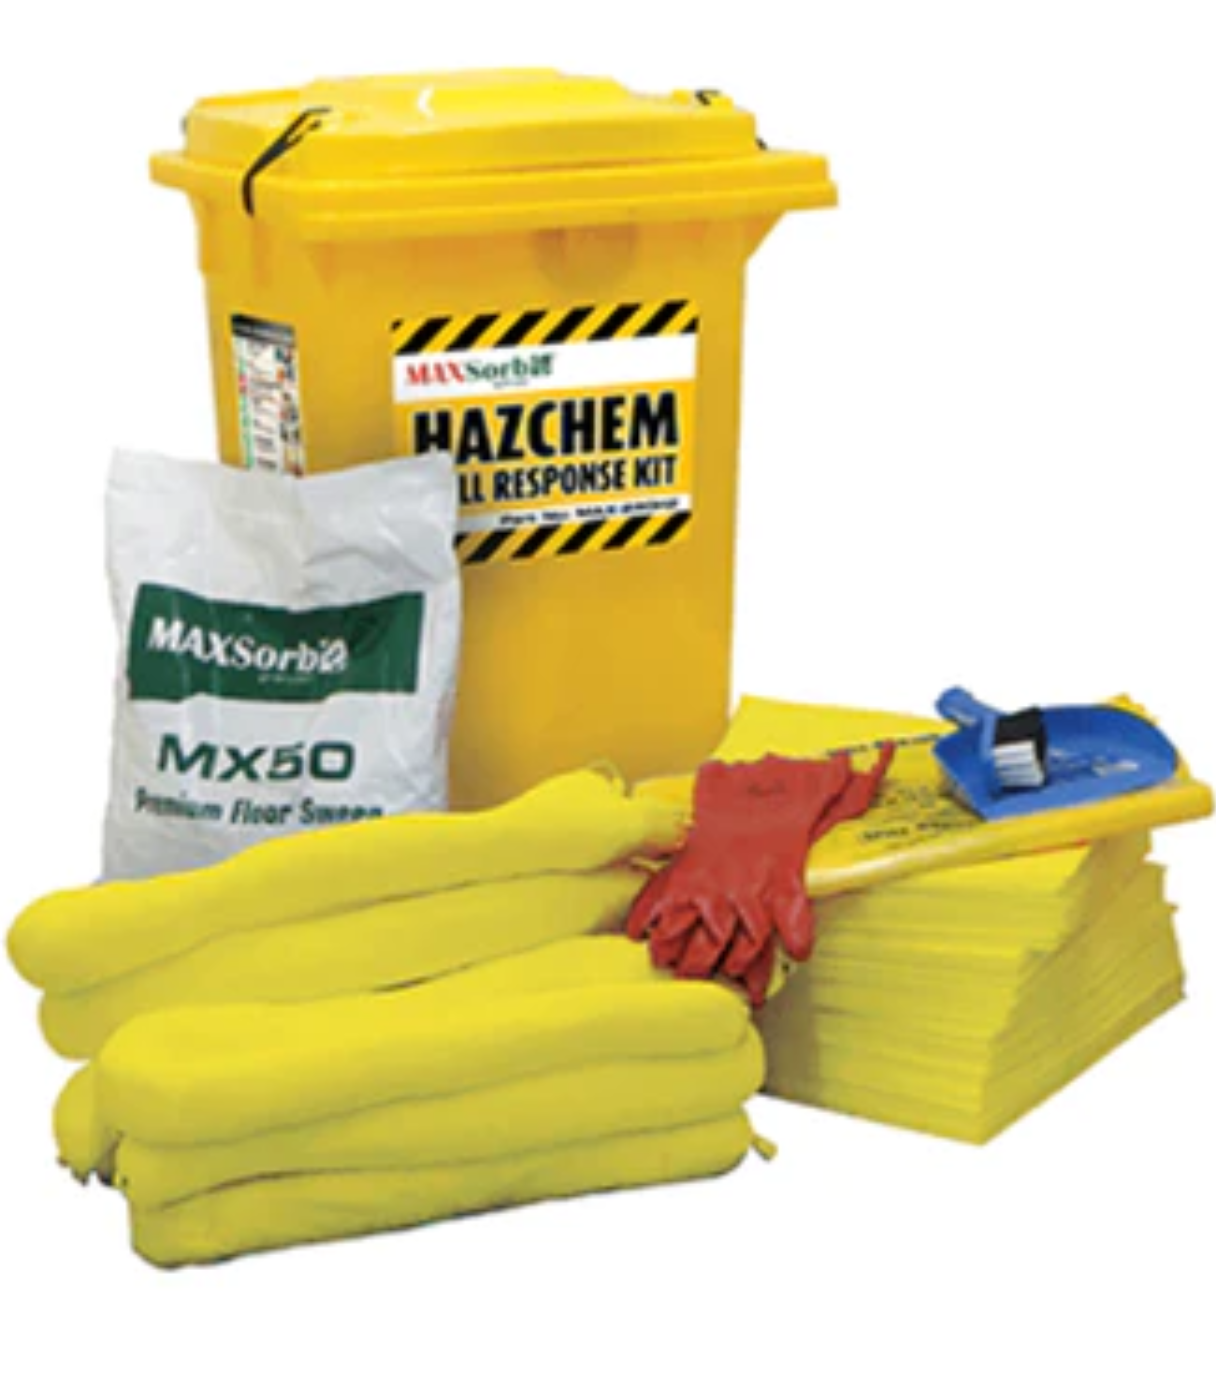 How To Clean Up a Hazardous Spill Safely and Effectively